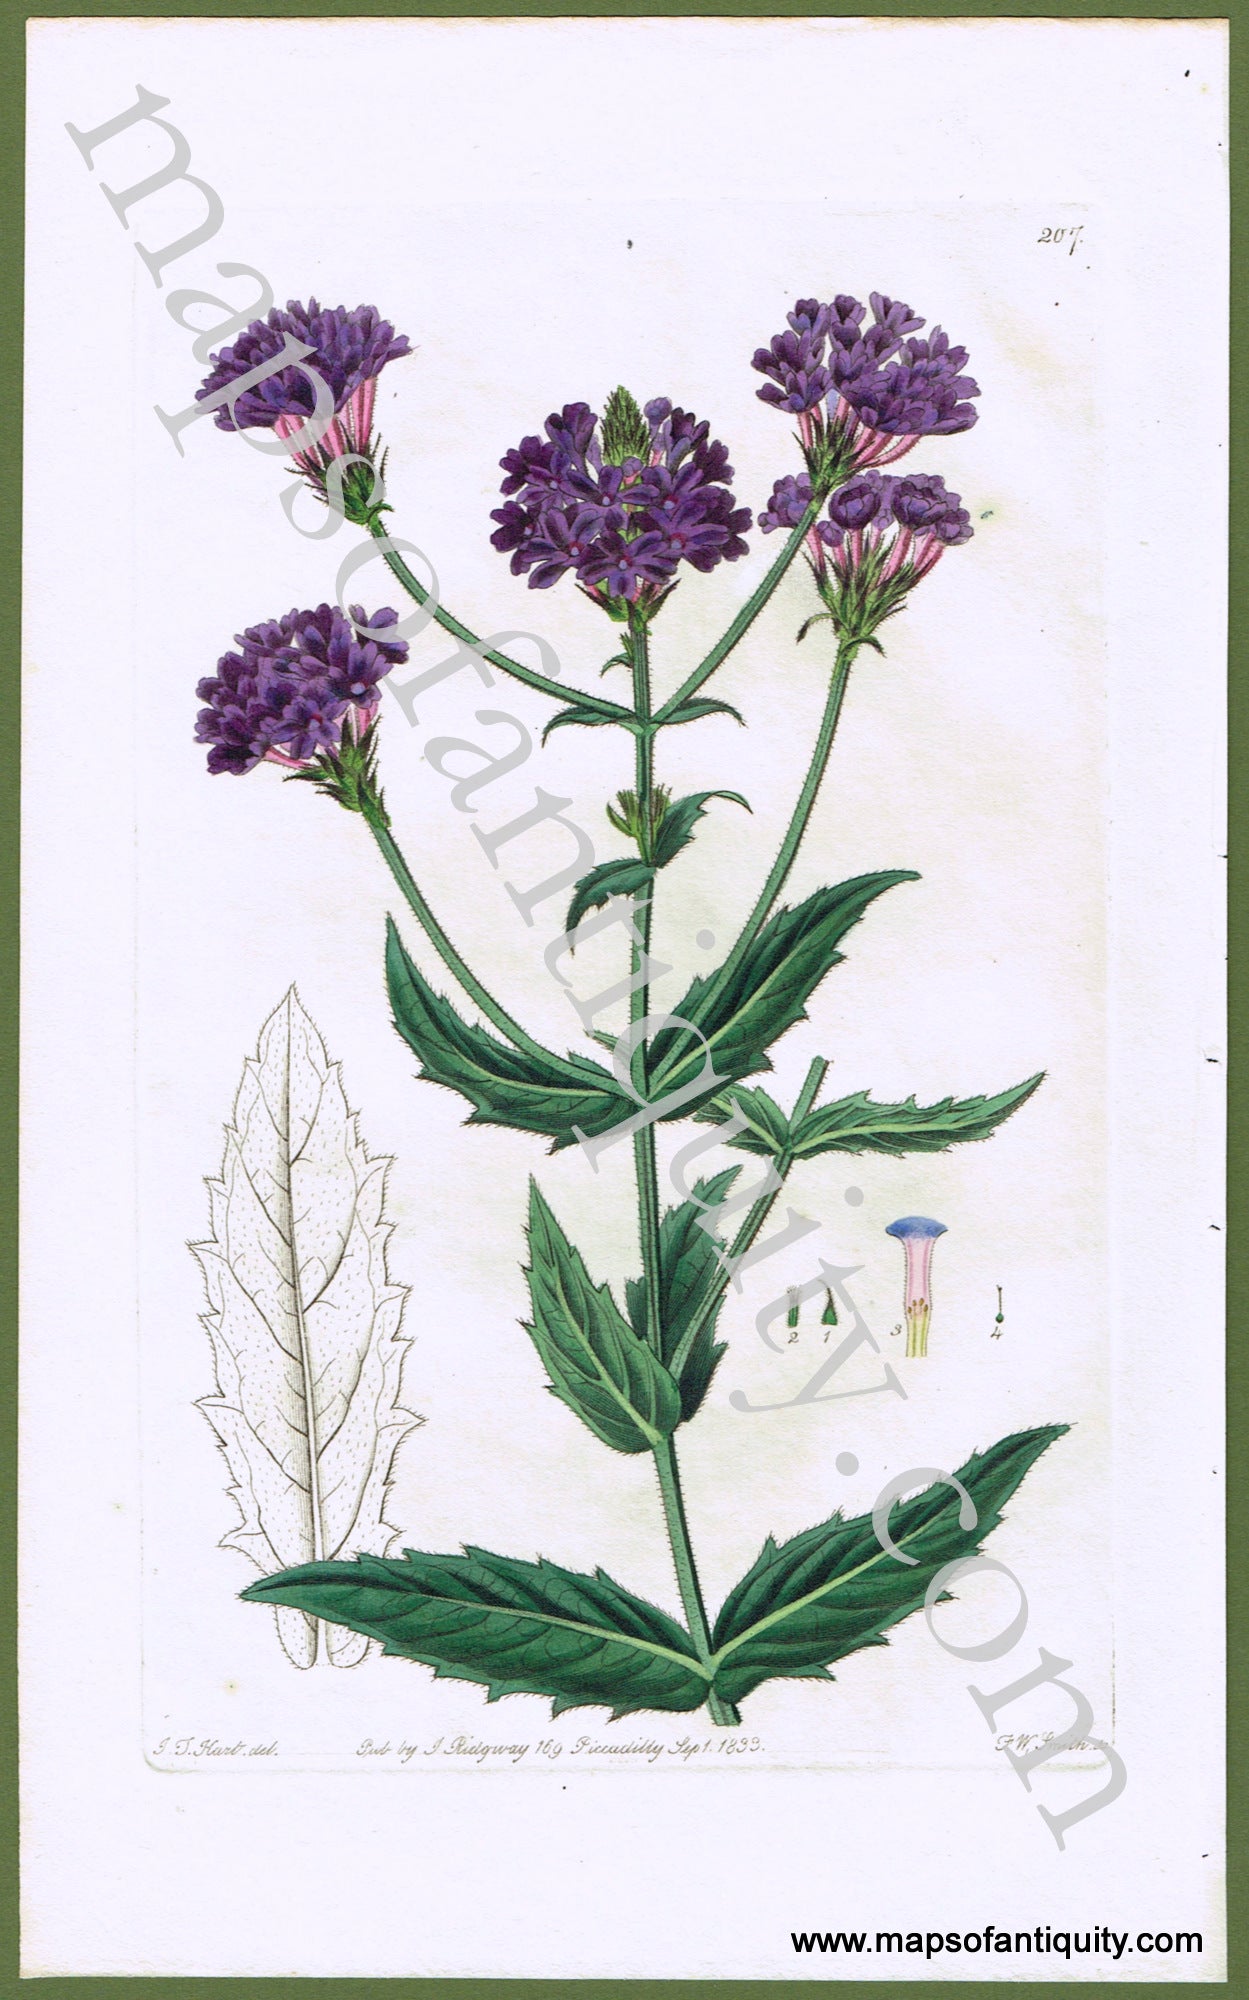 Antique-Hand-Colored-Engraved-Illustration-Verbena-venosa-(Veiny-leaved-Vervain)-Natural-History-Prints-Botanical-1833-Smith/Ridgway-Maps-Of-Antiquity